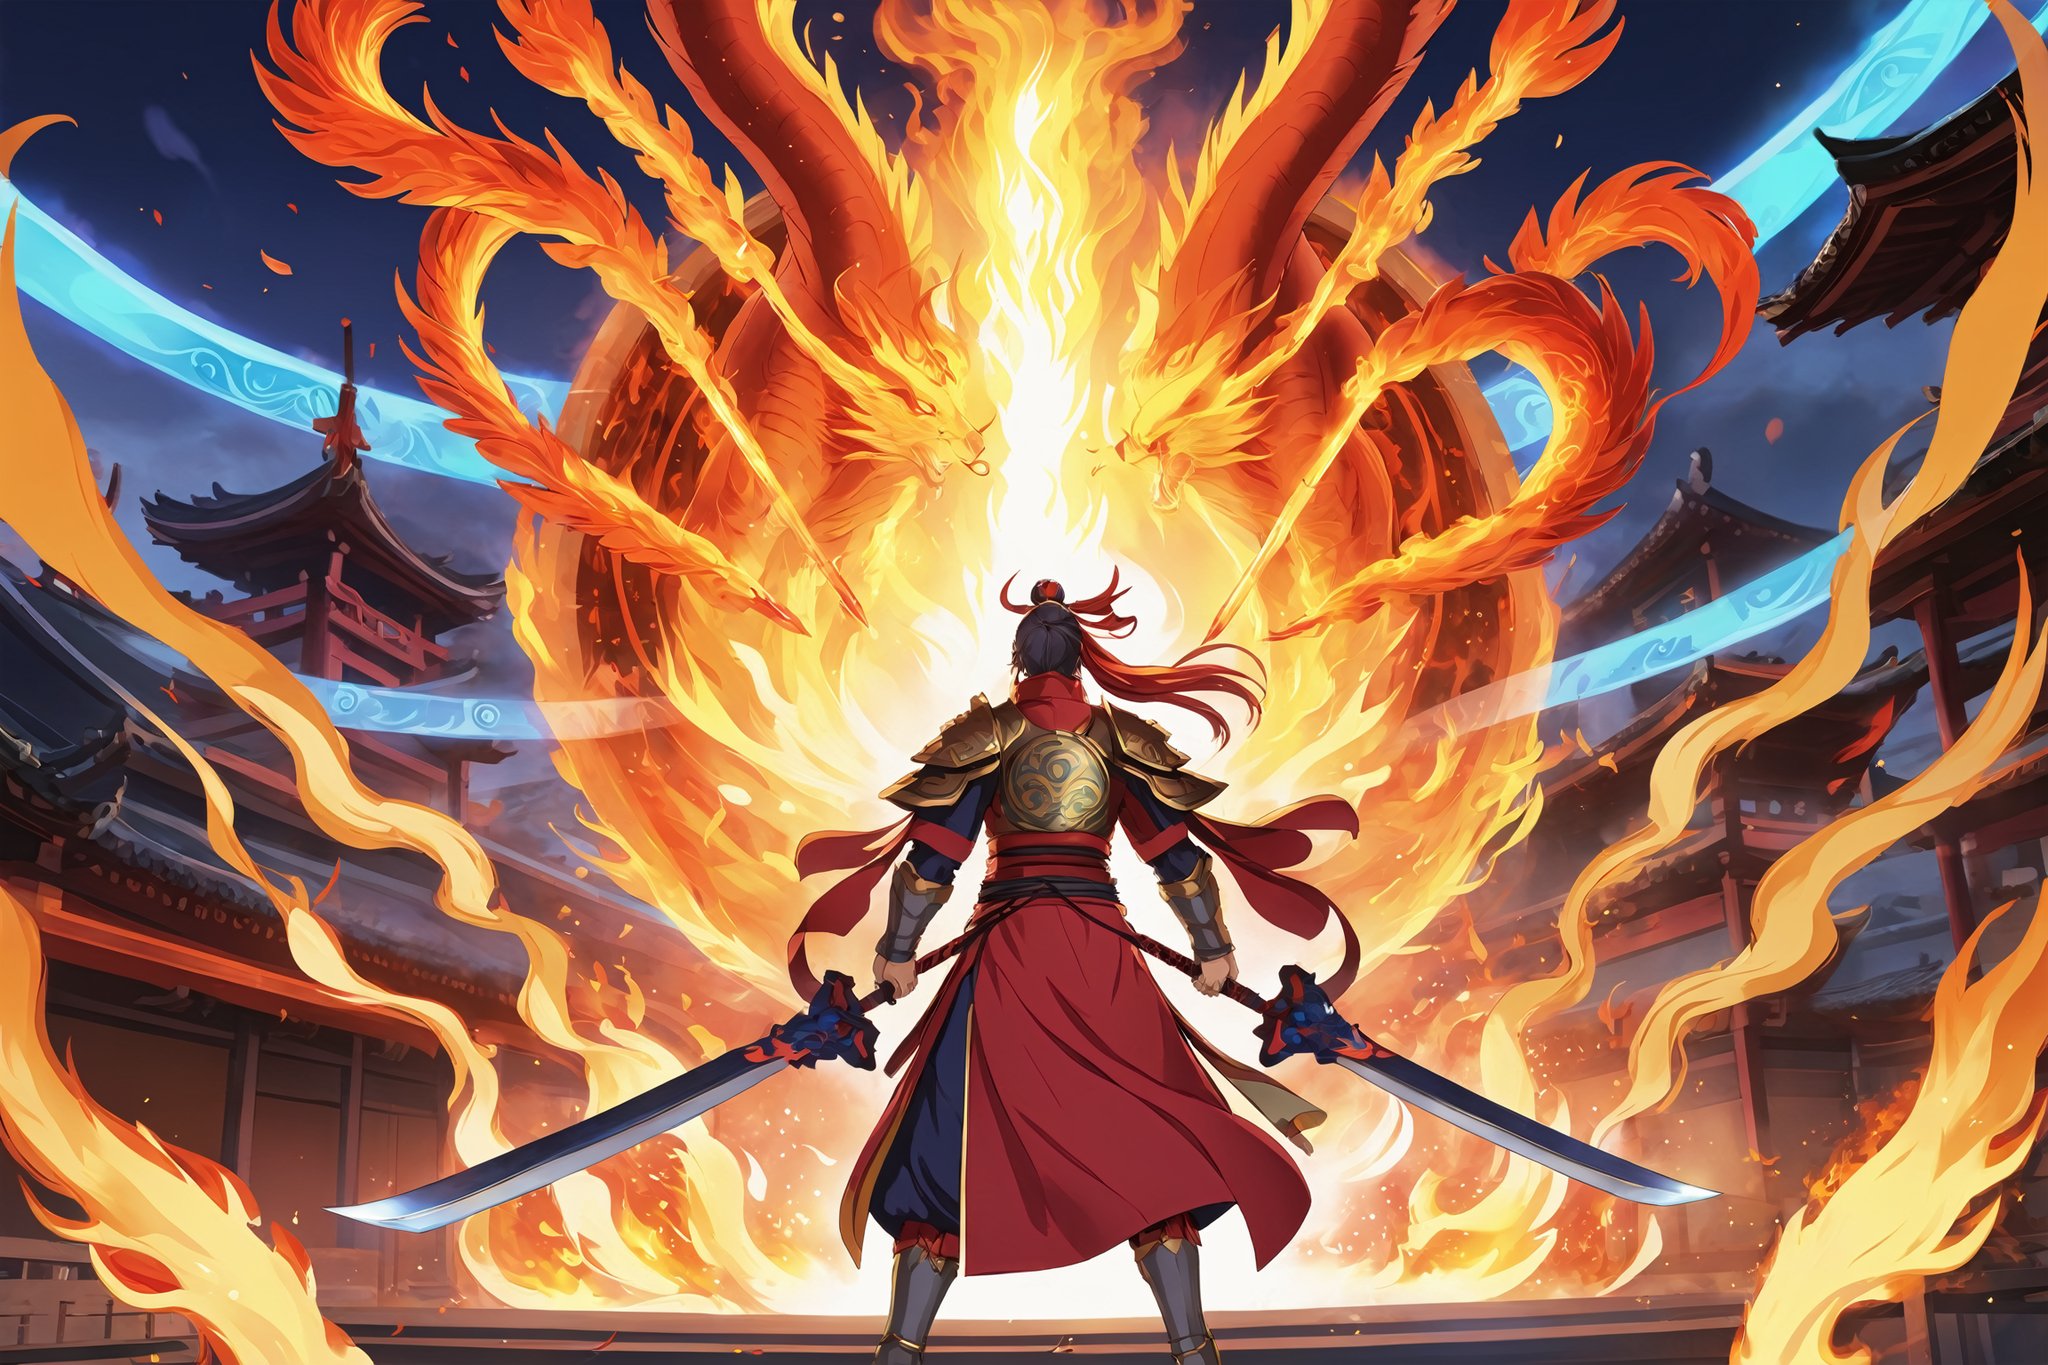 anime artwork {prompt} . anime style, key visual, vibrant, studio anime, highly detailed. In Chinese mythology, the gods displayed red flame magic weapons, and the flames were blazing.